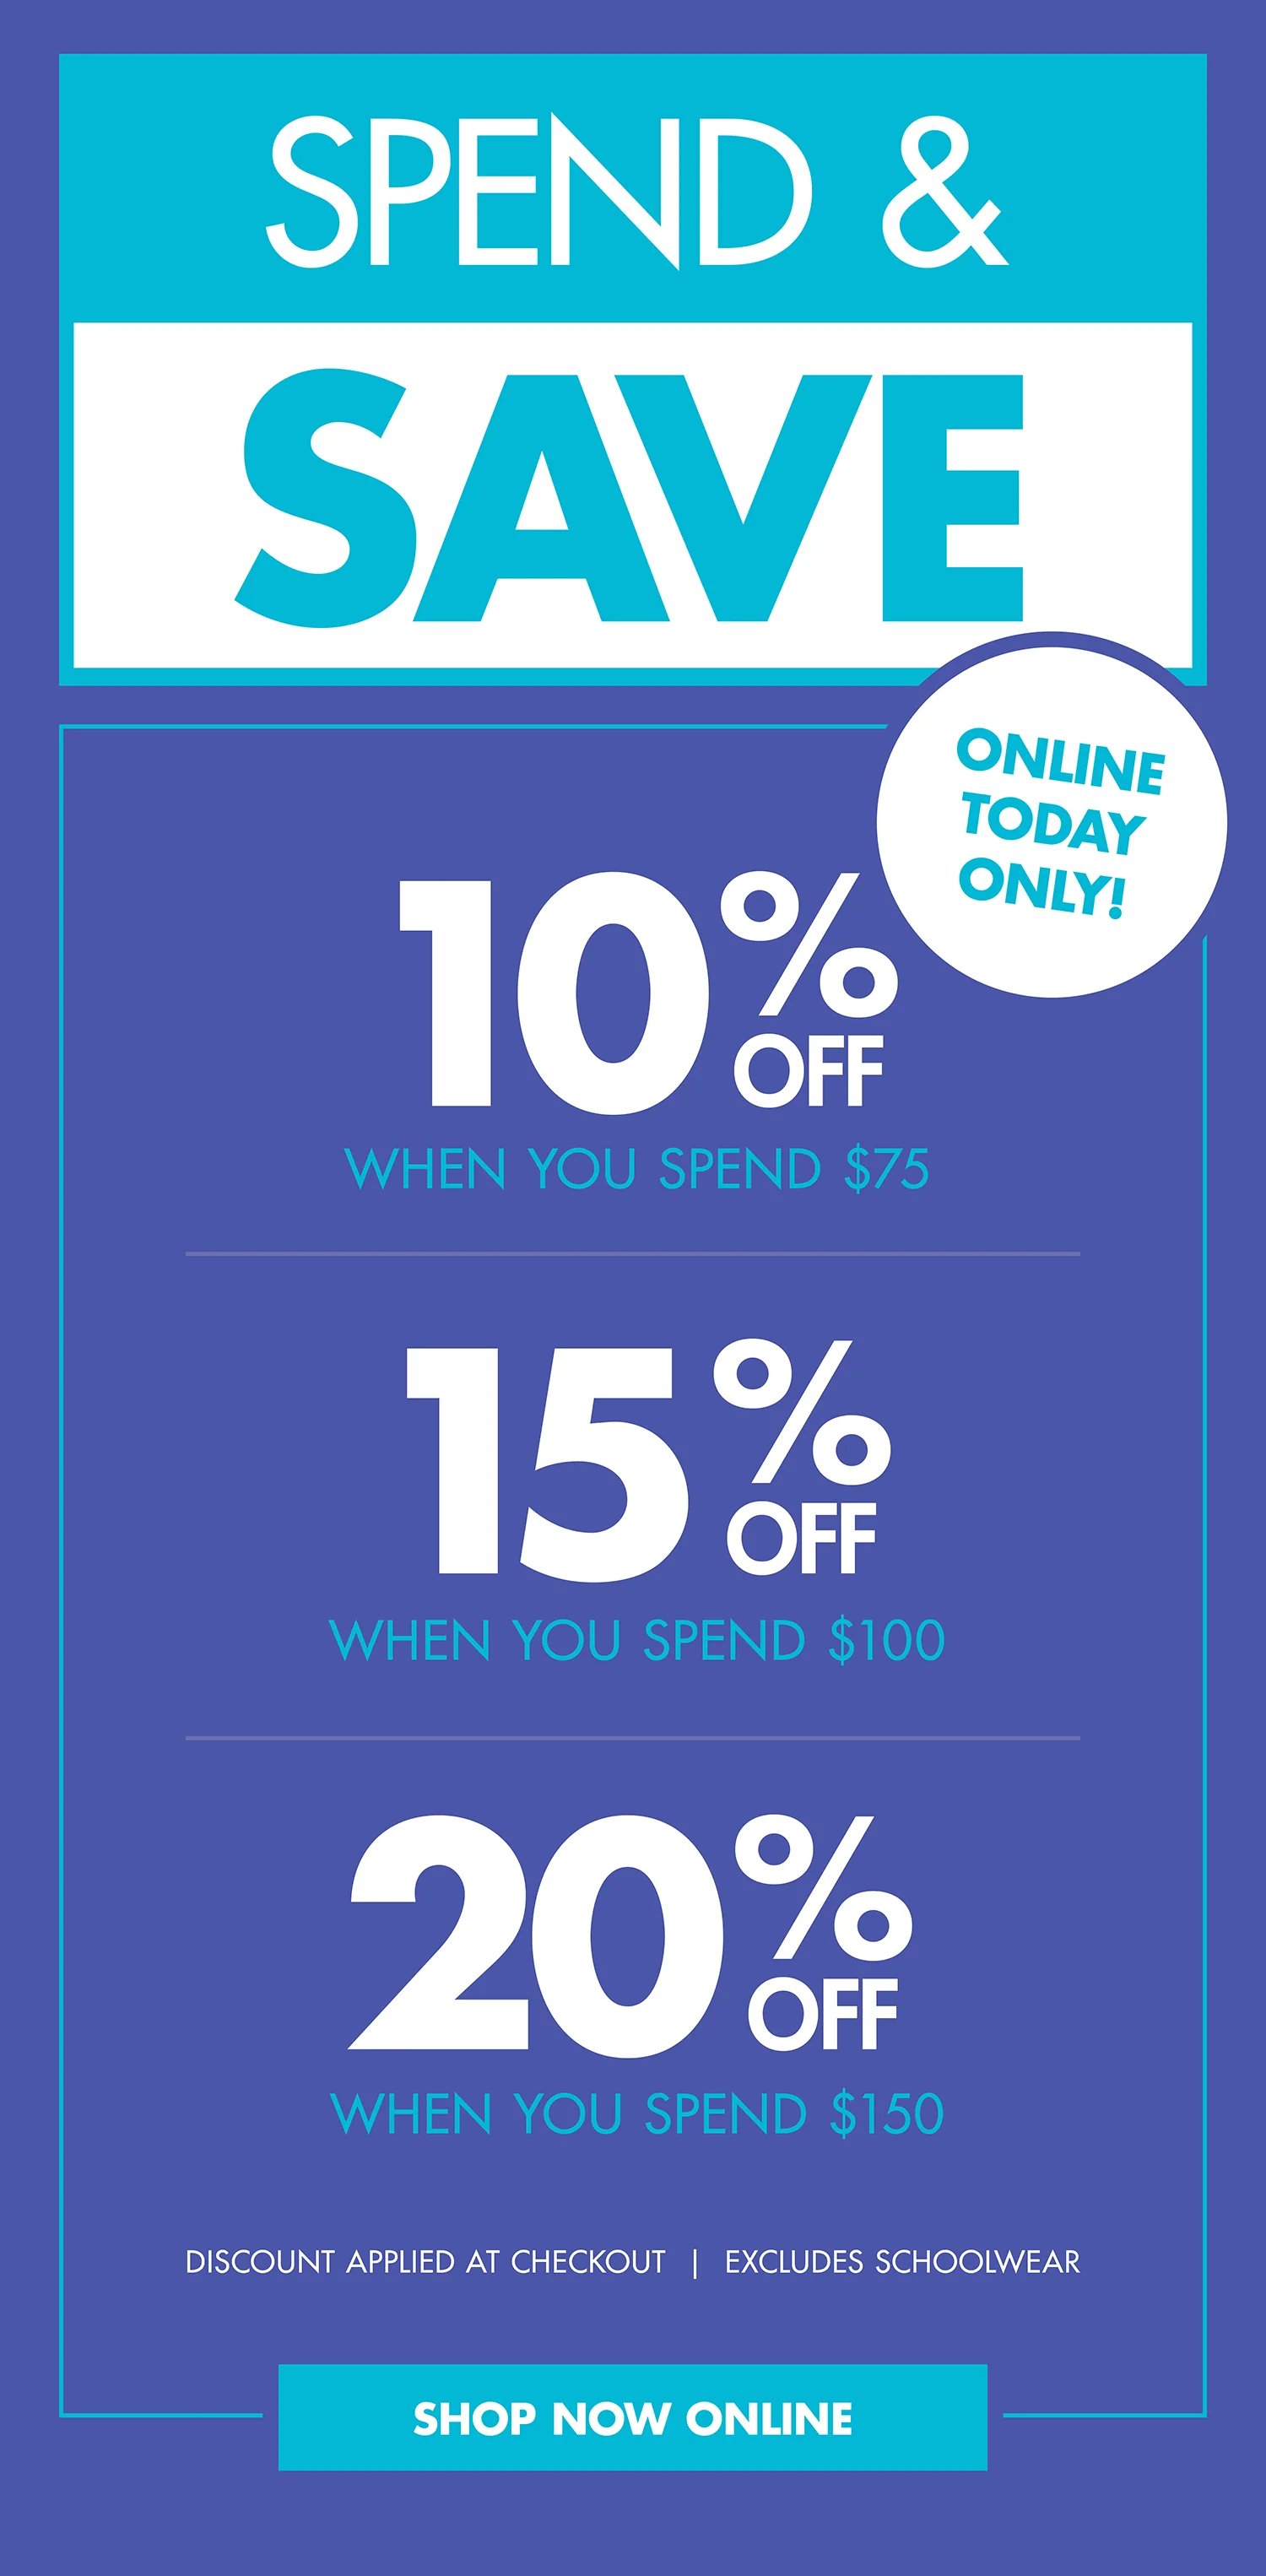 SPEND & SAVE ONLINE TODAY ONLY!